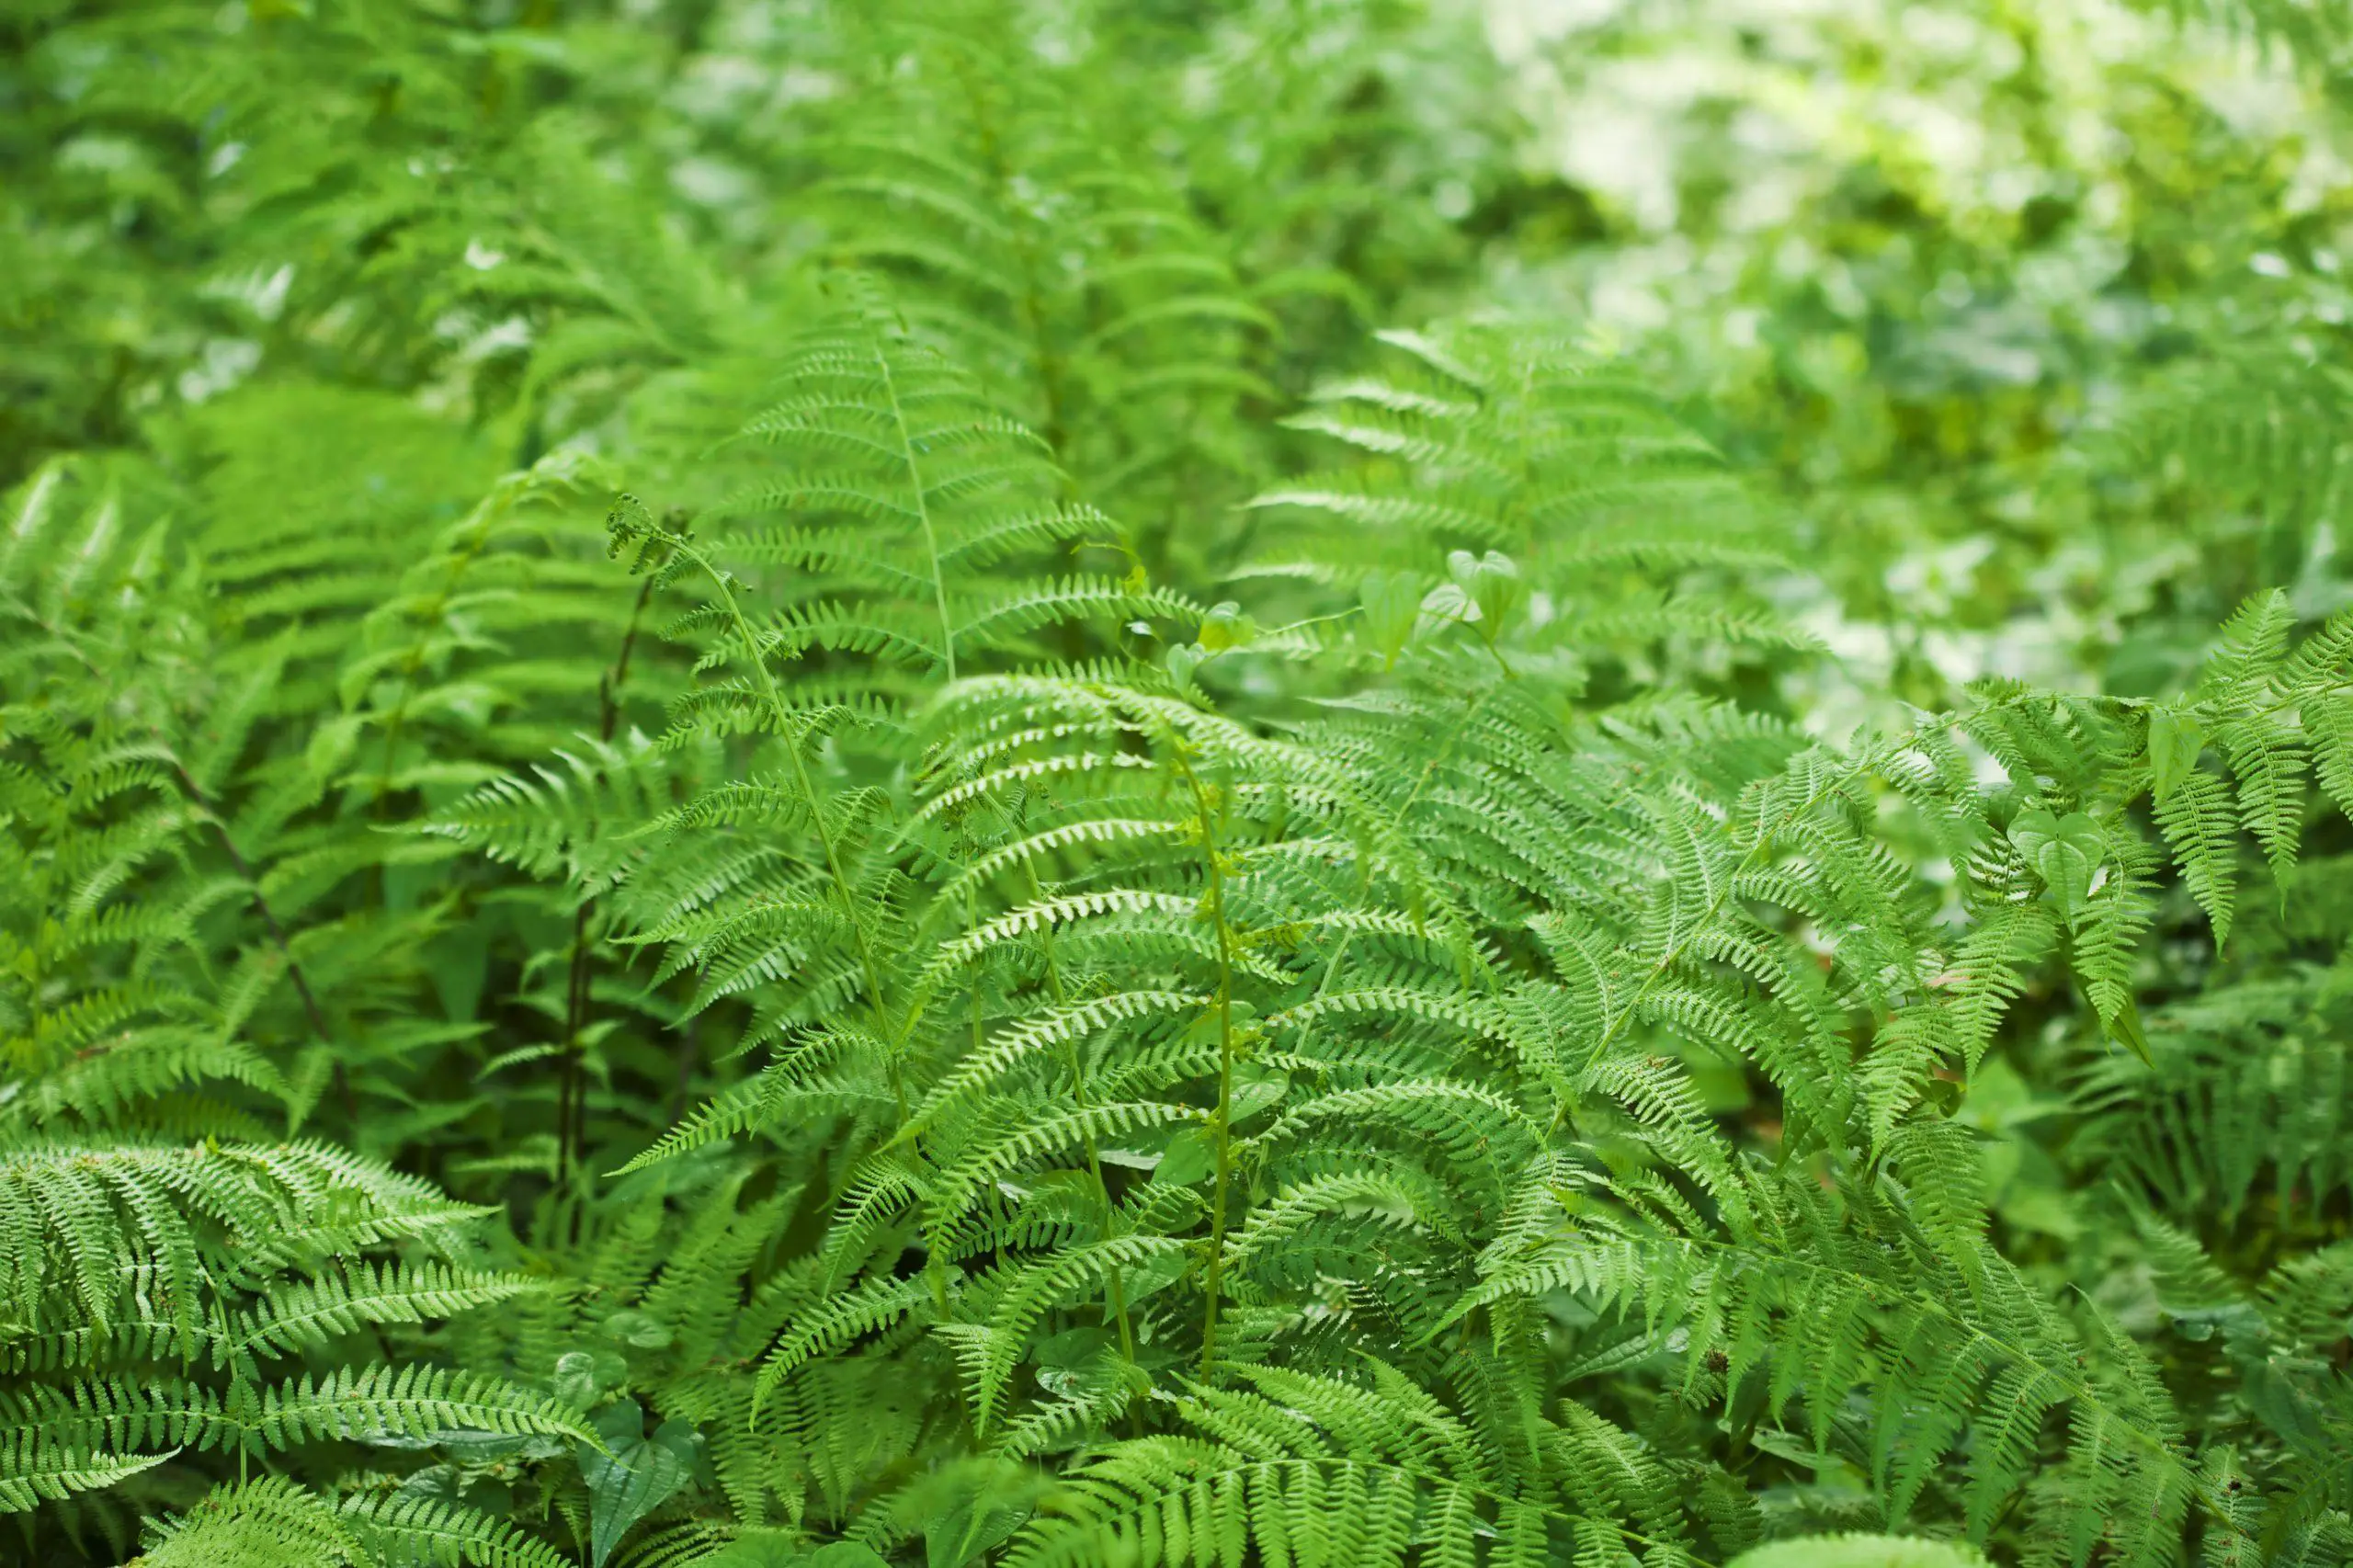 Ferns cover an area completely